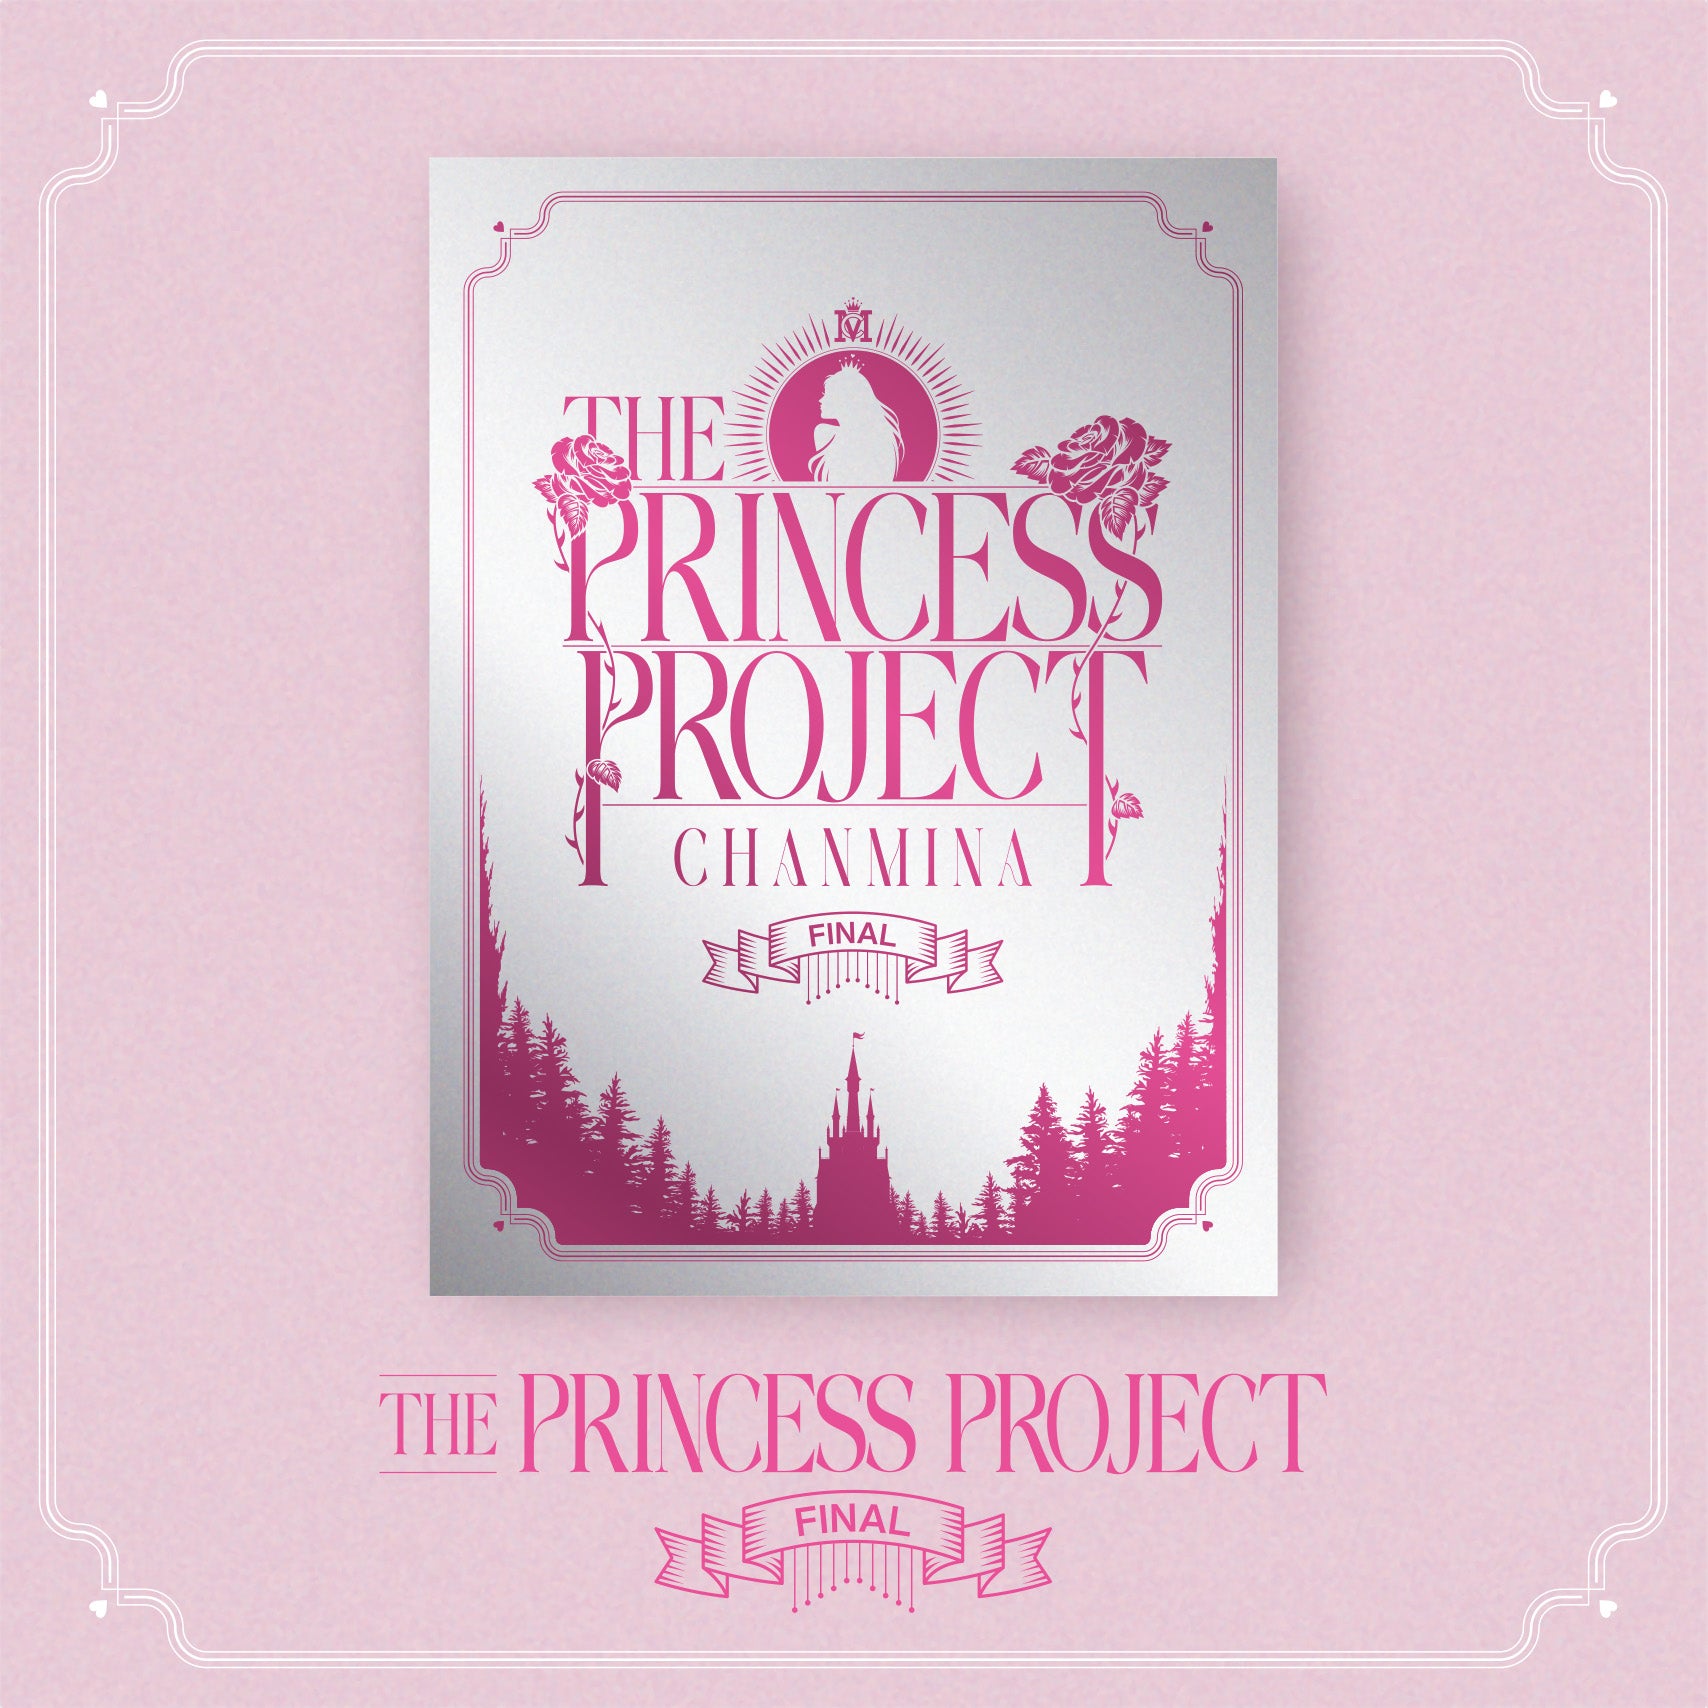 THE PRINCESS PROJECT - FINAL - DVD